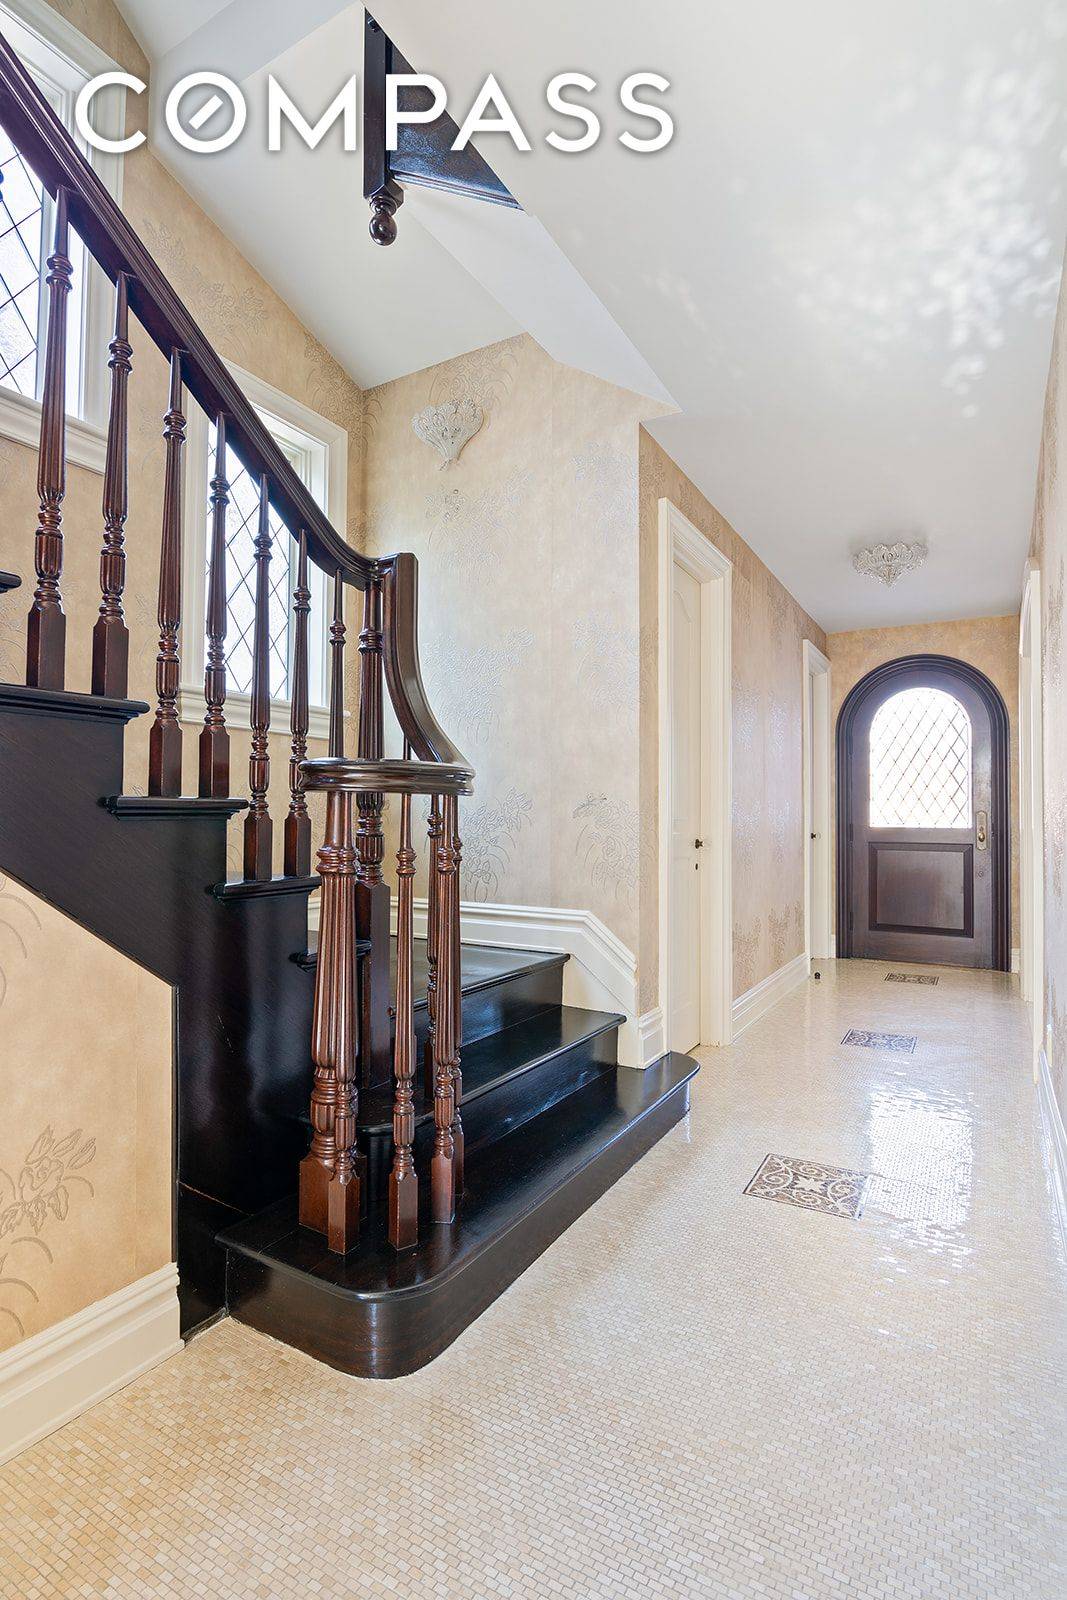 Your Brooklyn dream estate awaits in this exquisite five bedroom, four and a half bathroom residence located on the most desirable street in Bay Ridge.